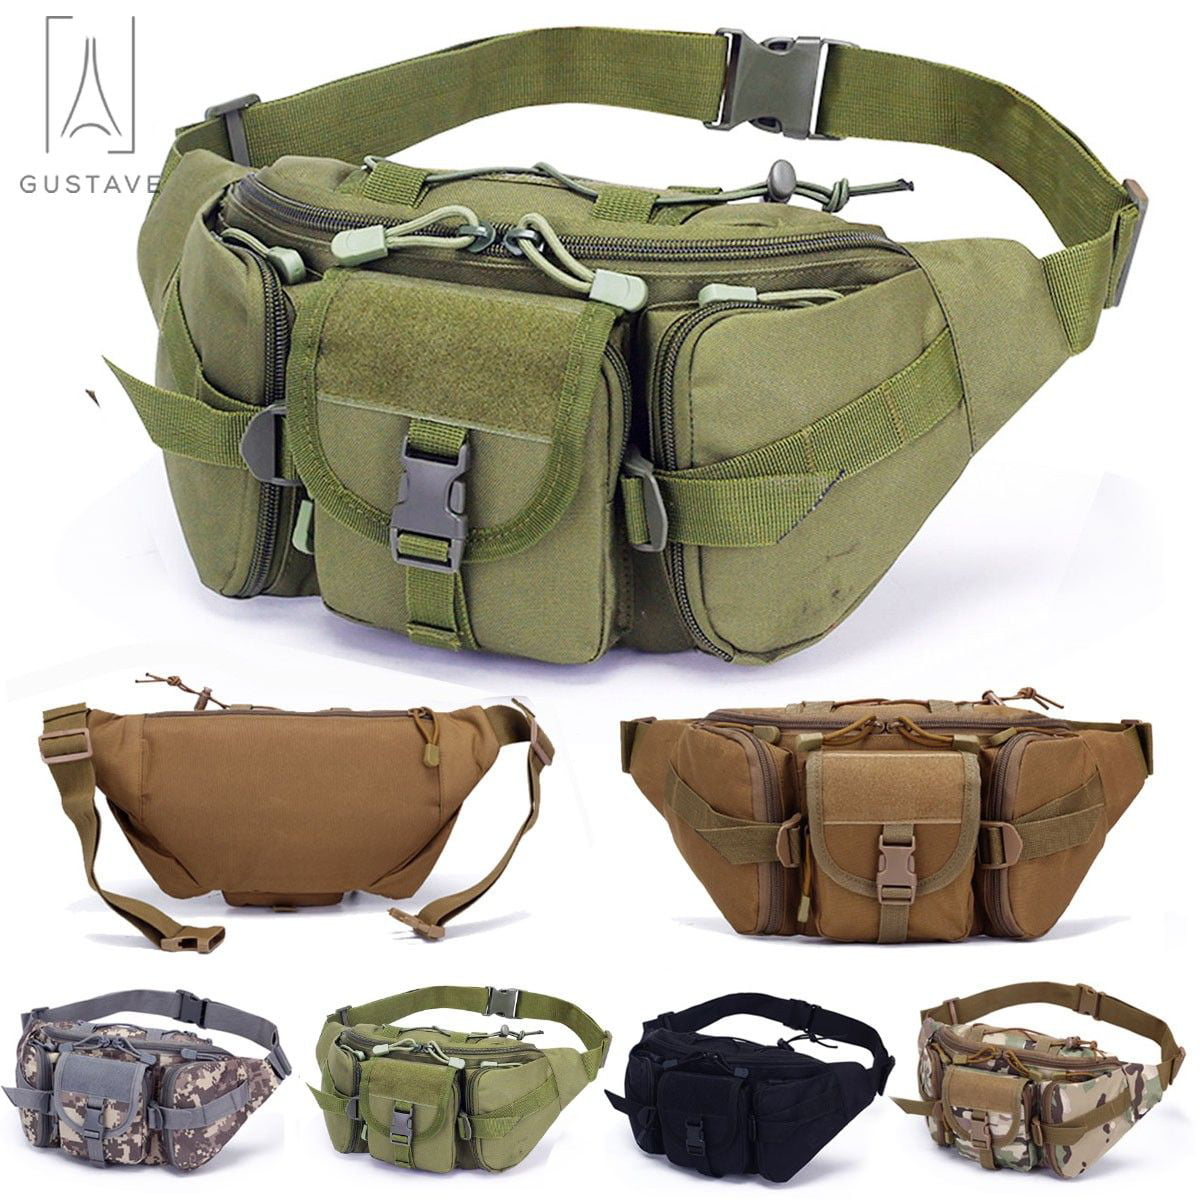 USA Outdoor Camping Hiking Travel Military Waist Bag Belt Pack Fanny Chest Pouch 